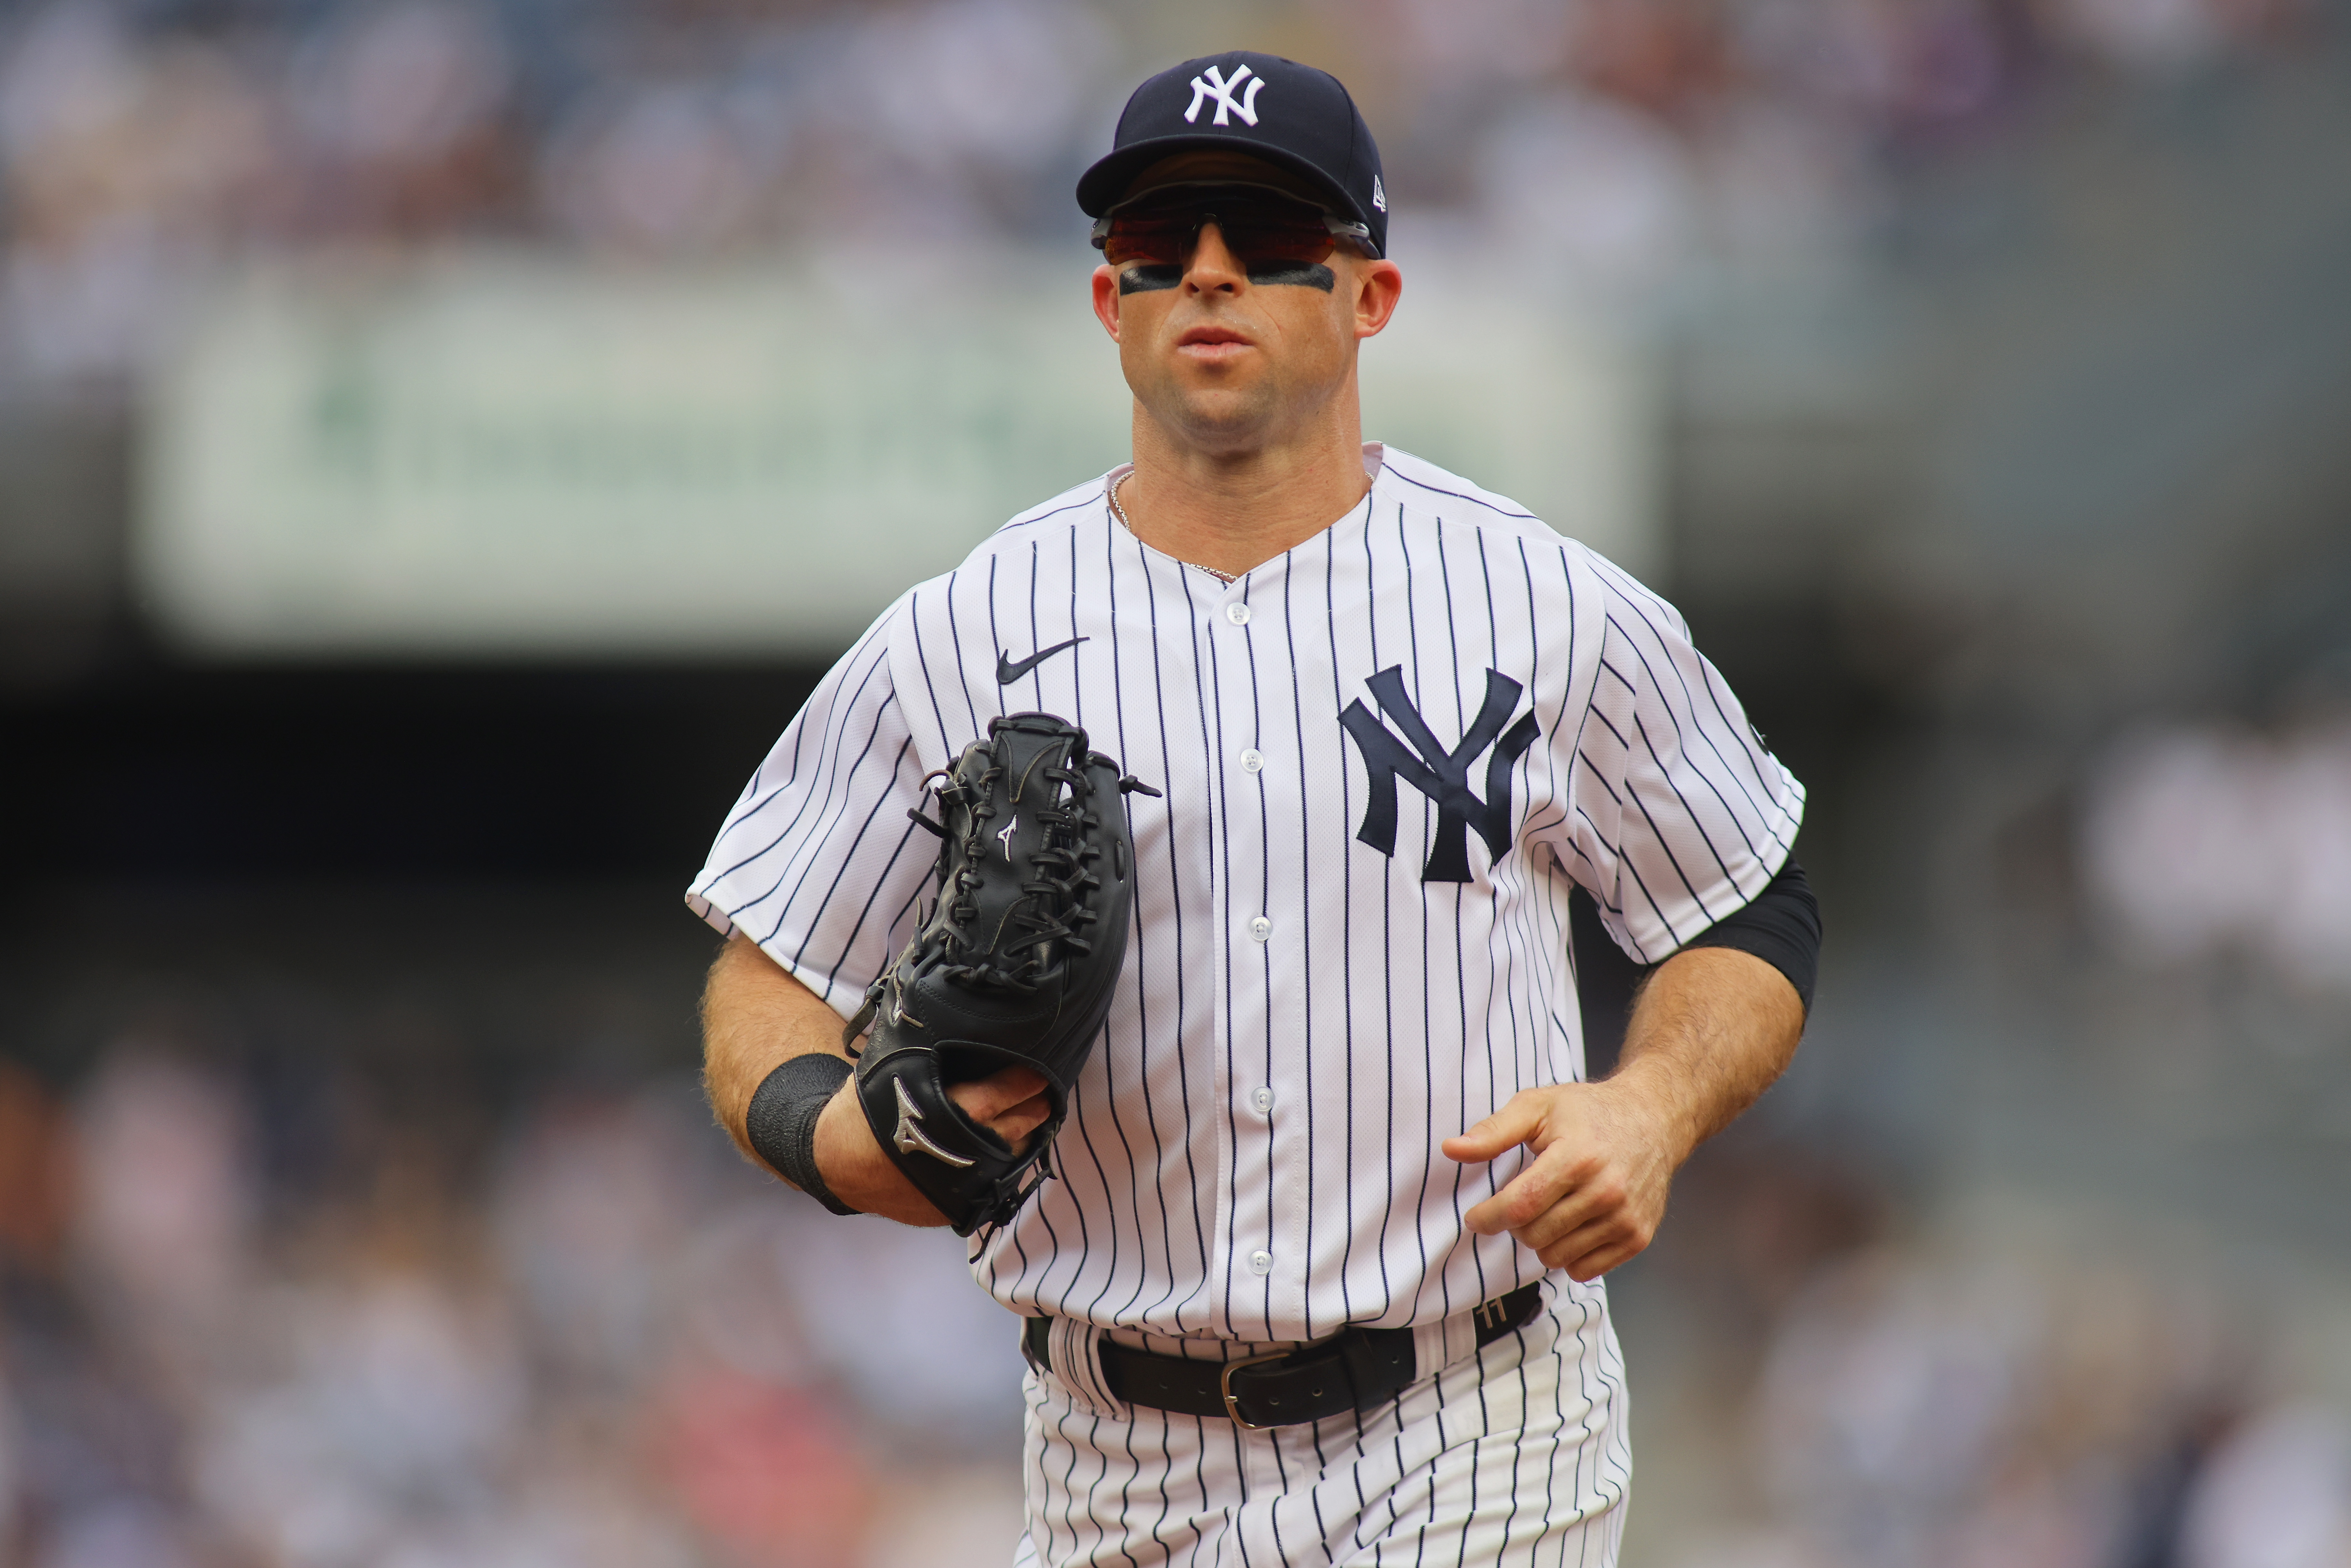 The resolve is why Brett Gardner is still here - The Athletic